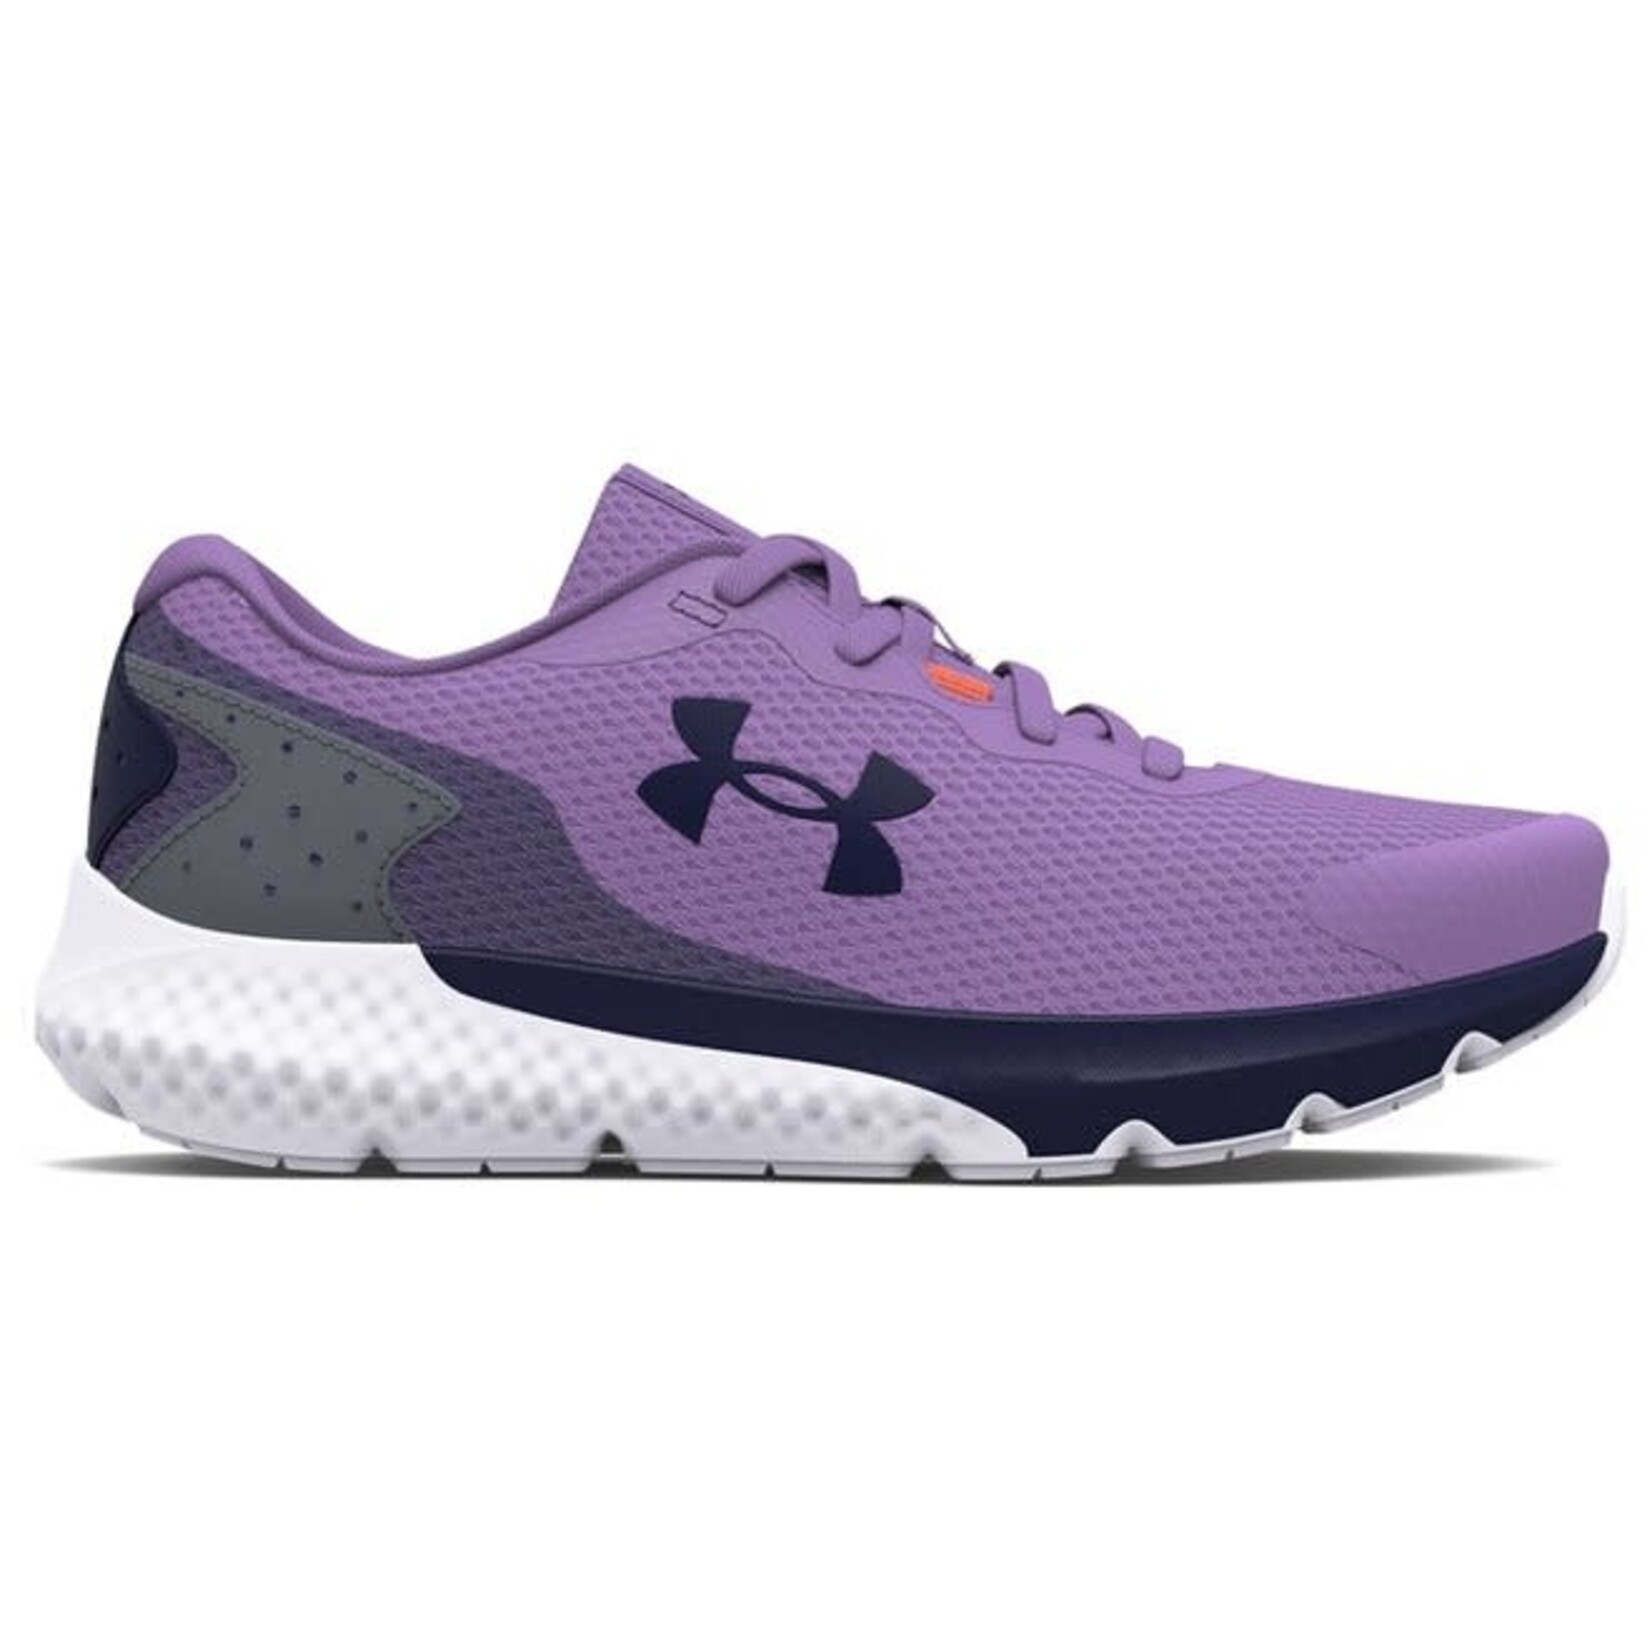 Under Armour Under Armour Running Shoes, Rogue 3 AL, GPS, Girls